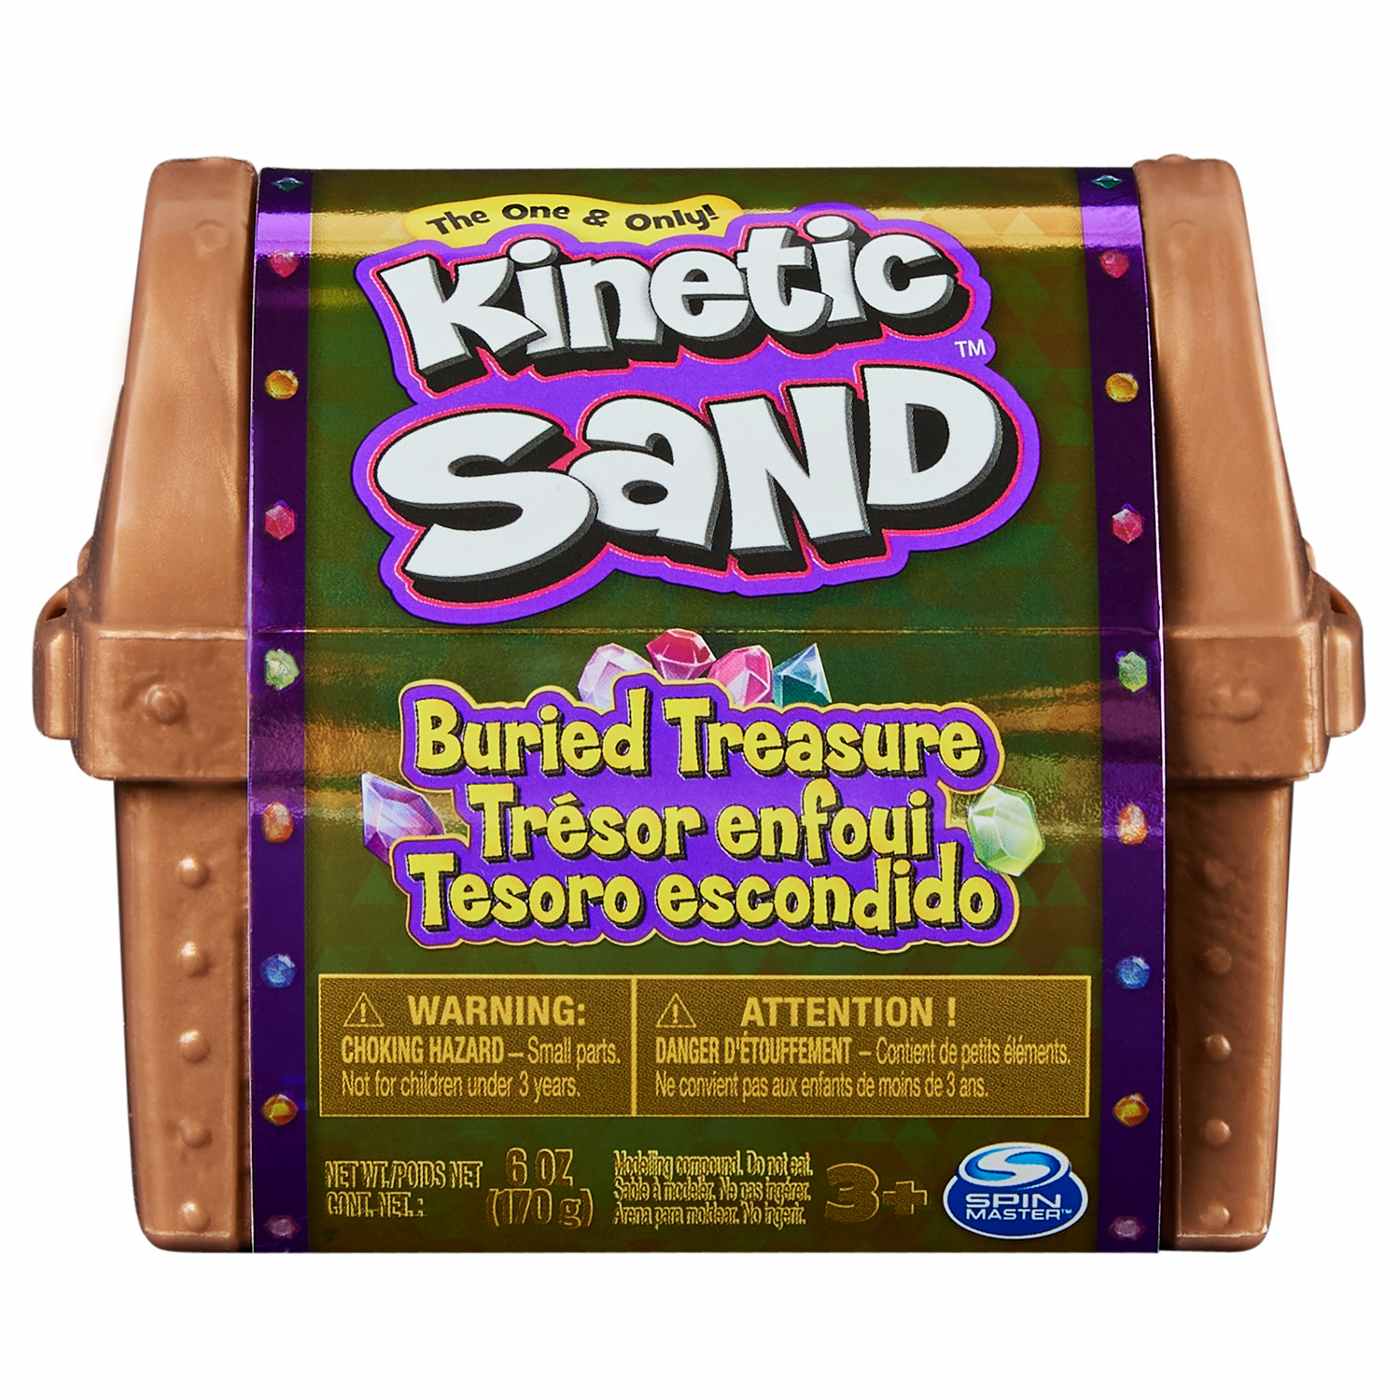 Kinetic Sand Buried Treasure Mystery Chest; image 1 of 3